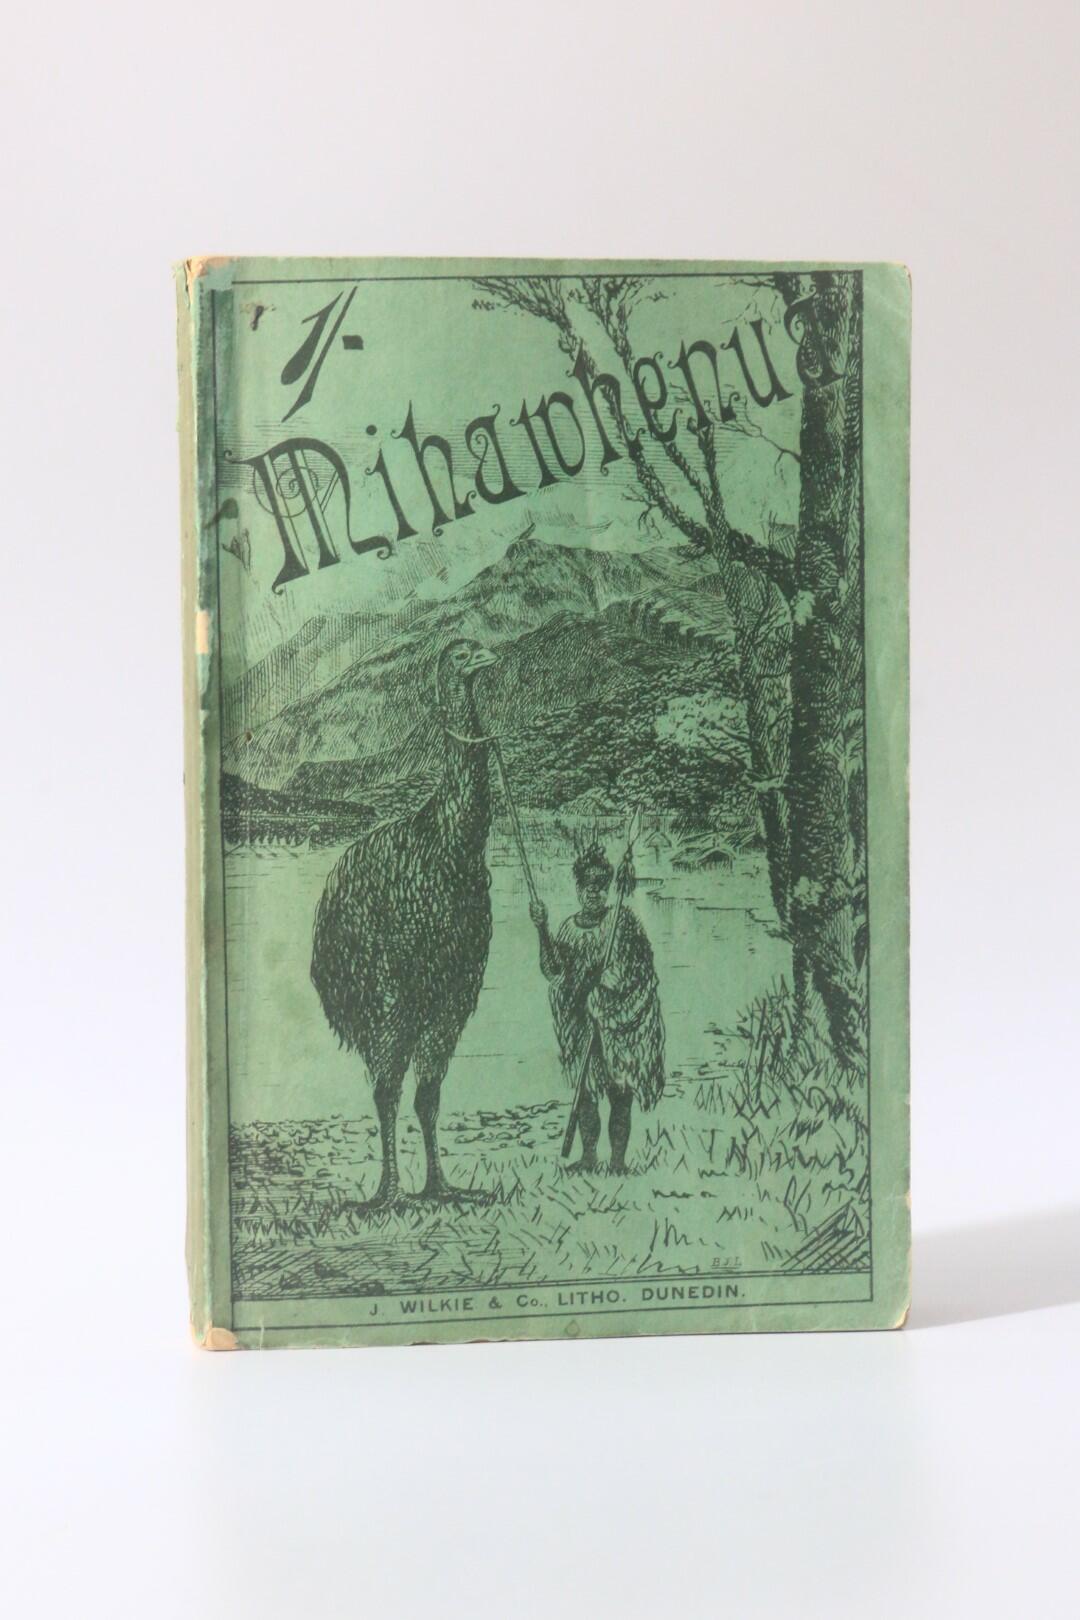 R.W. Brock [John Barr] - Mihawhenua: the Adventures of a Party of Tourists Amongst a Tribe of Maoris Discovered in Western Otago, New Zealand. Recorded By R. W. Brock, MA, LLB. Edited By R. H. Chapman - J. Wilkie & Co., 1888, First Thus.